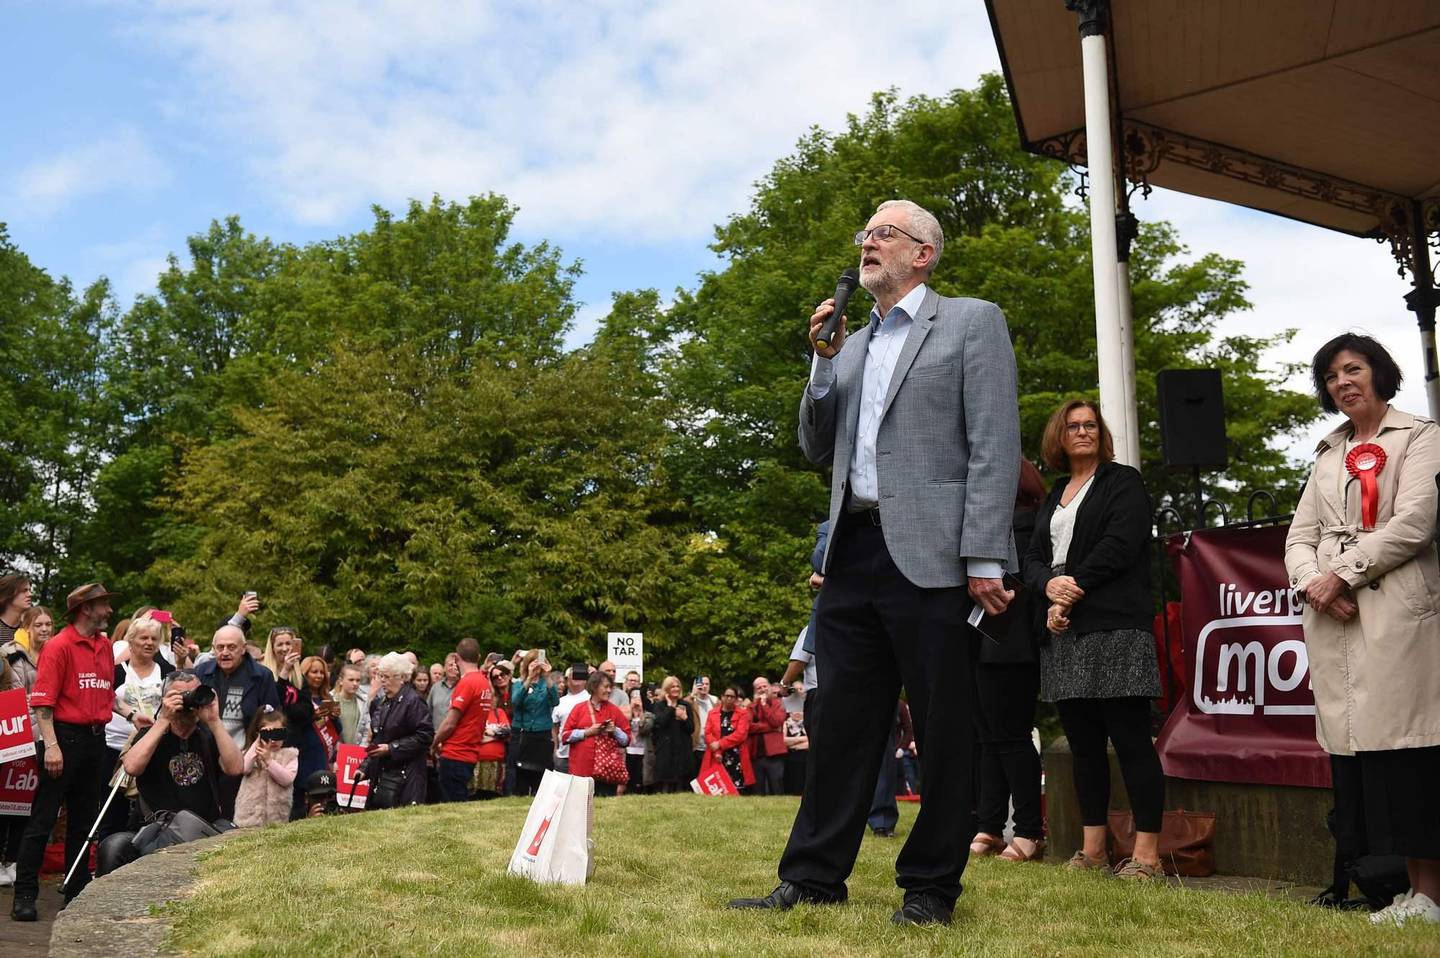 Britain's opposition Labour party leader Jeremy Corbyn addresses a European Parliament election campaign rally in Bootle, north England on May 18, 2019. (Photo by Oli SCARFF / AFP)